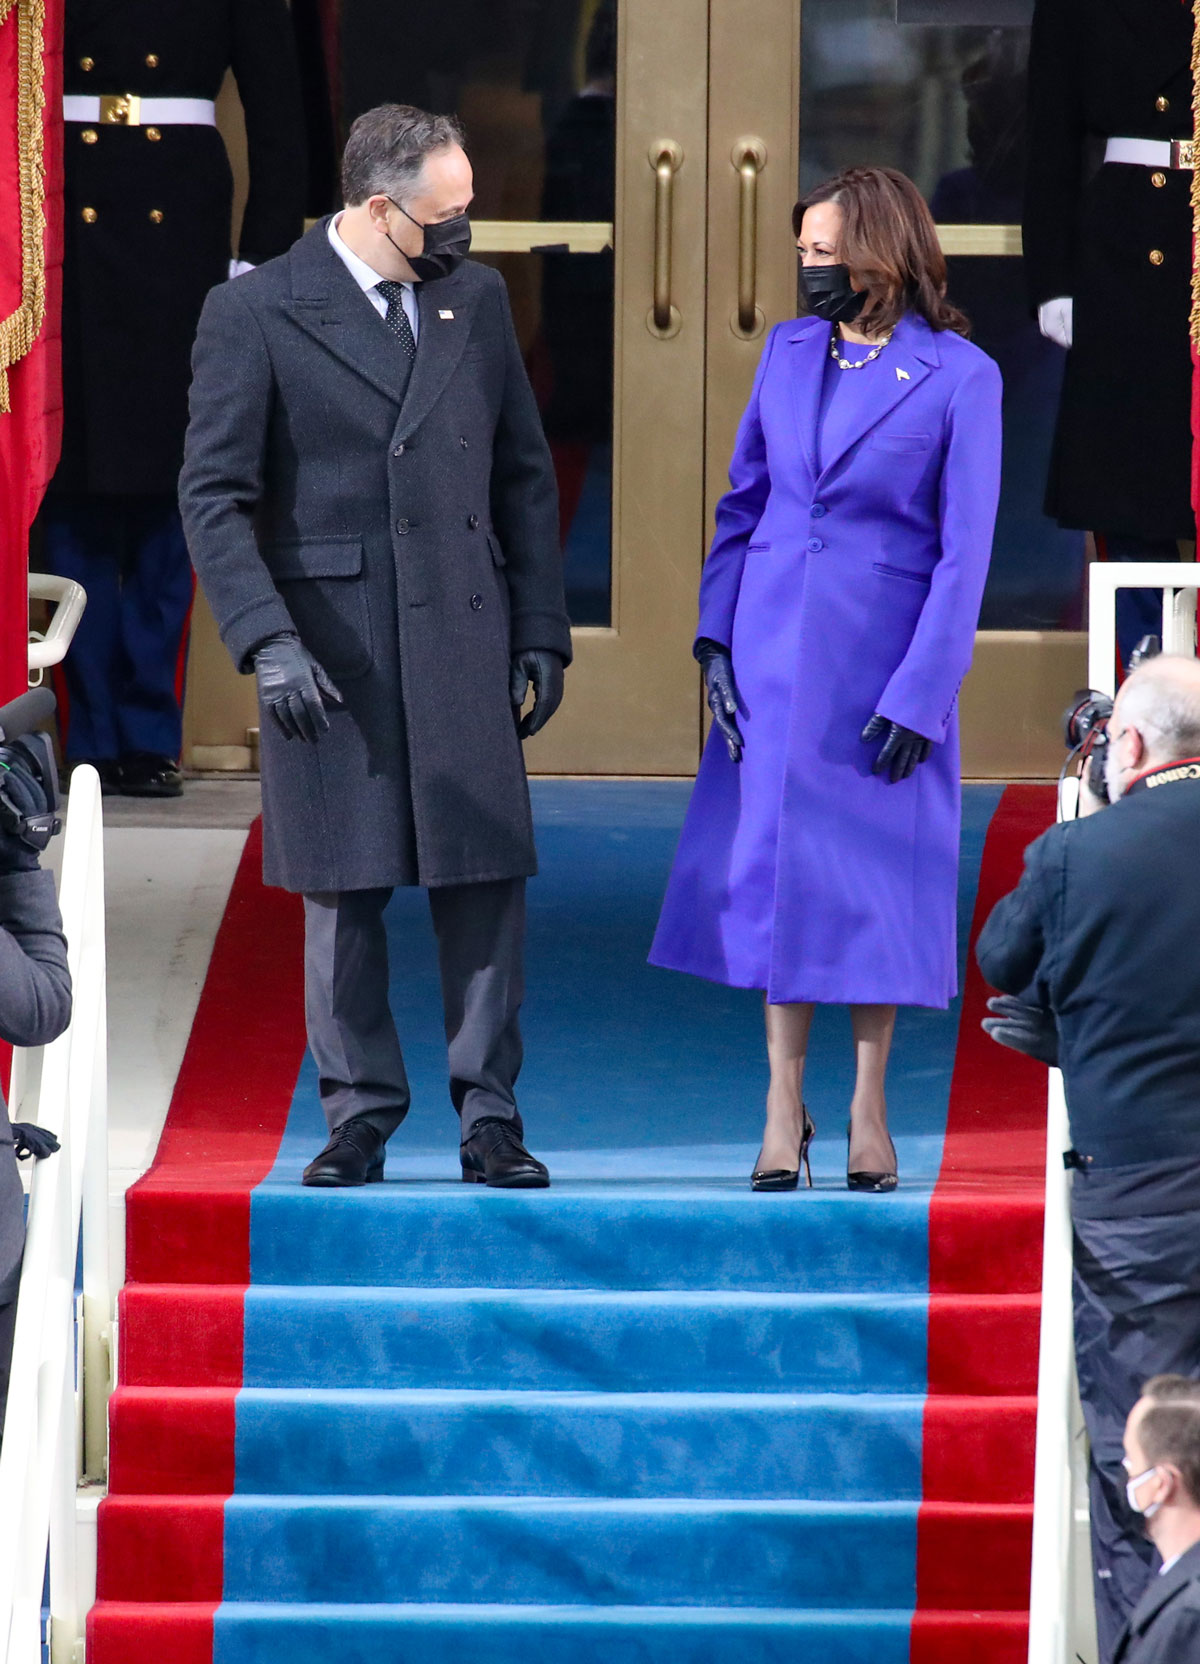 Why Kamala Harris’s Outfit Made a Striking Statement at the Inauguration